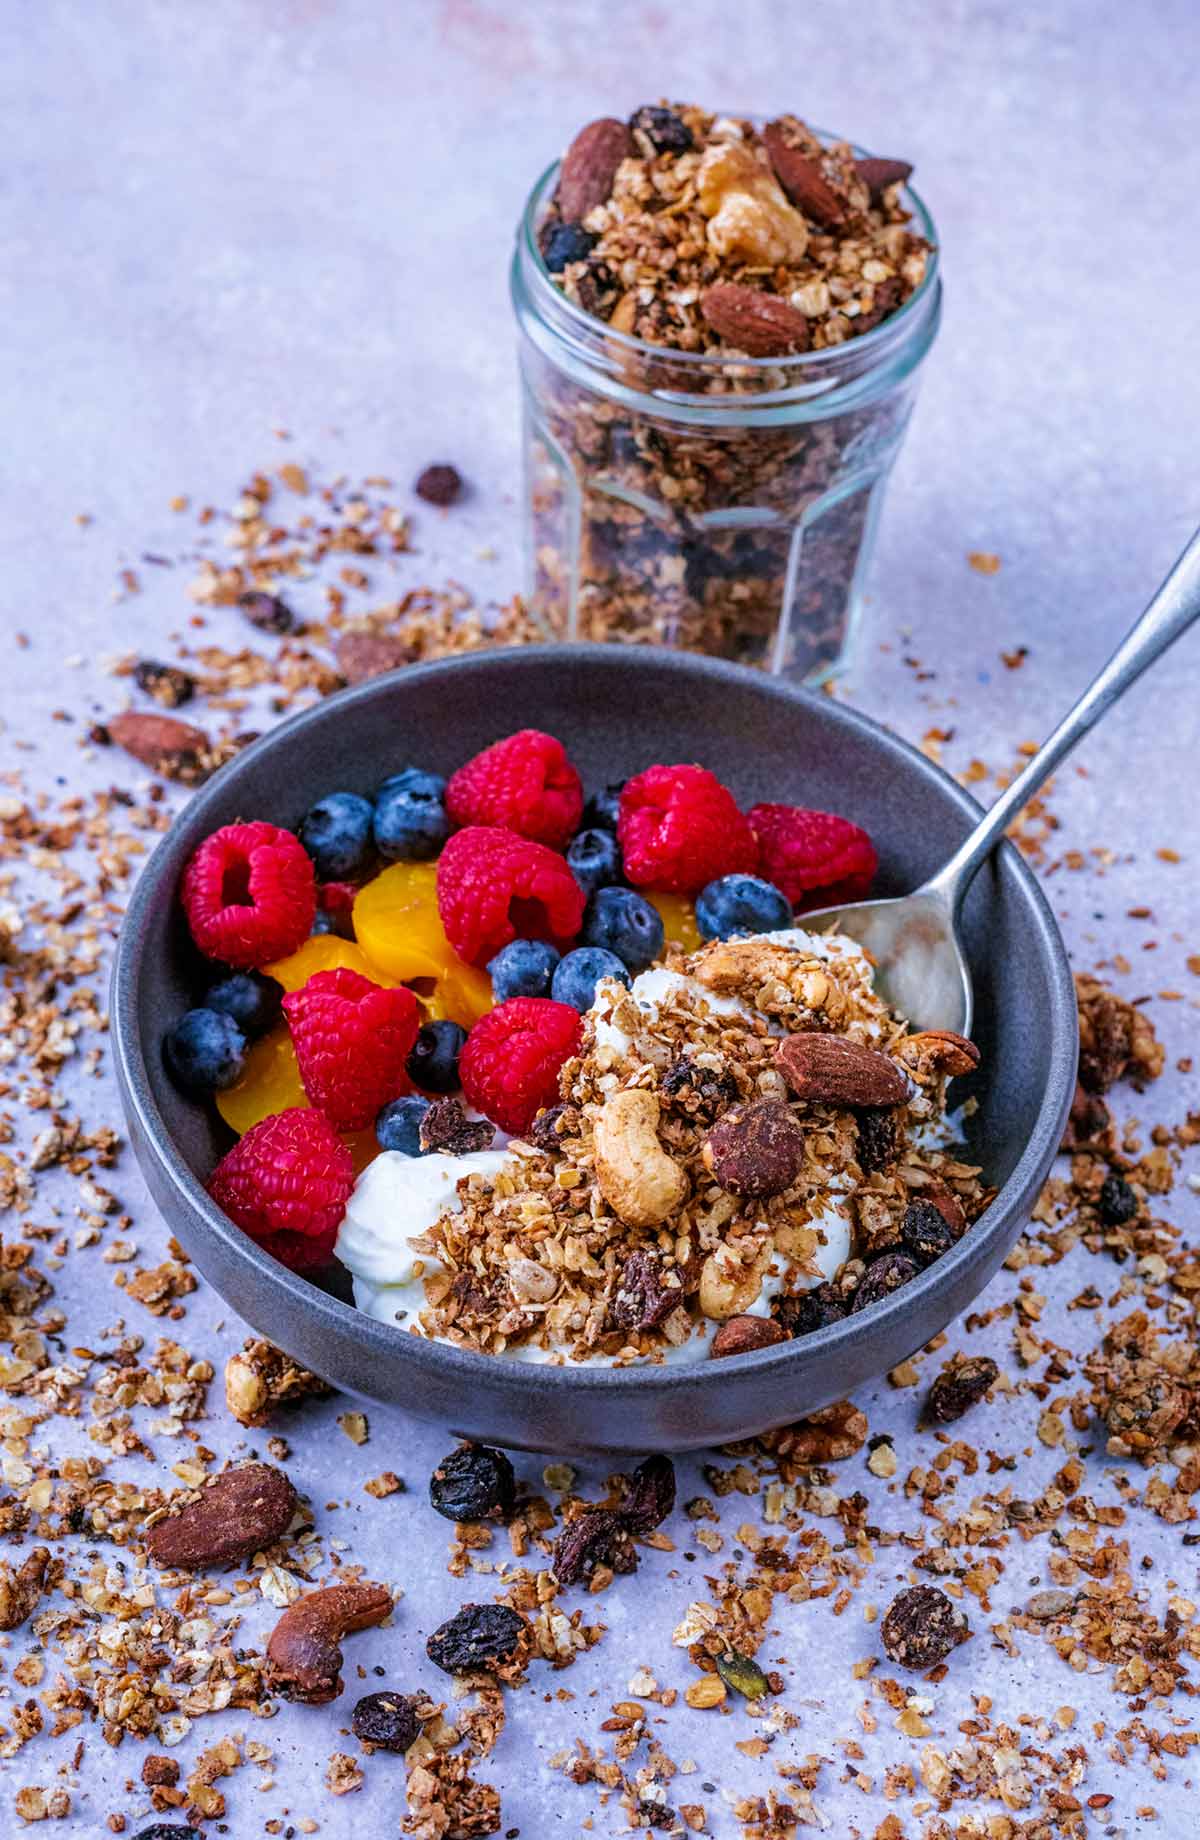 A bowl of yogurt and granola in front of a jar of more granola.